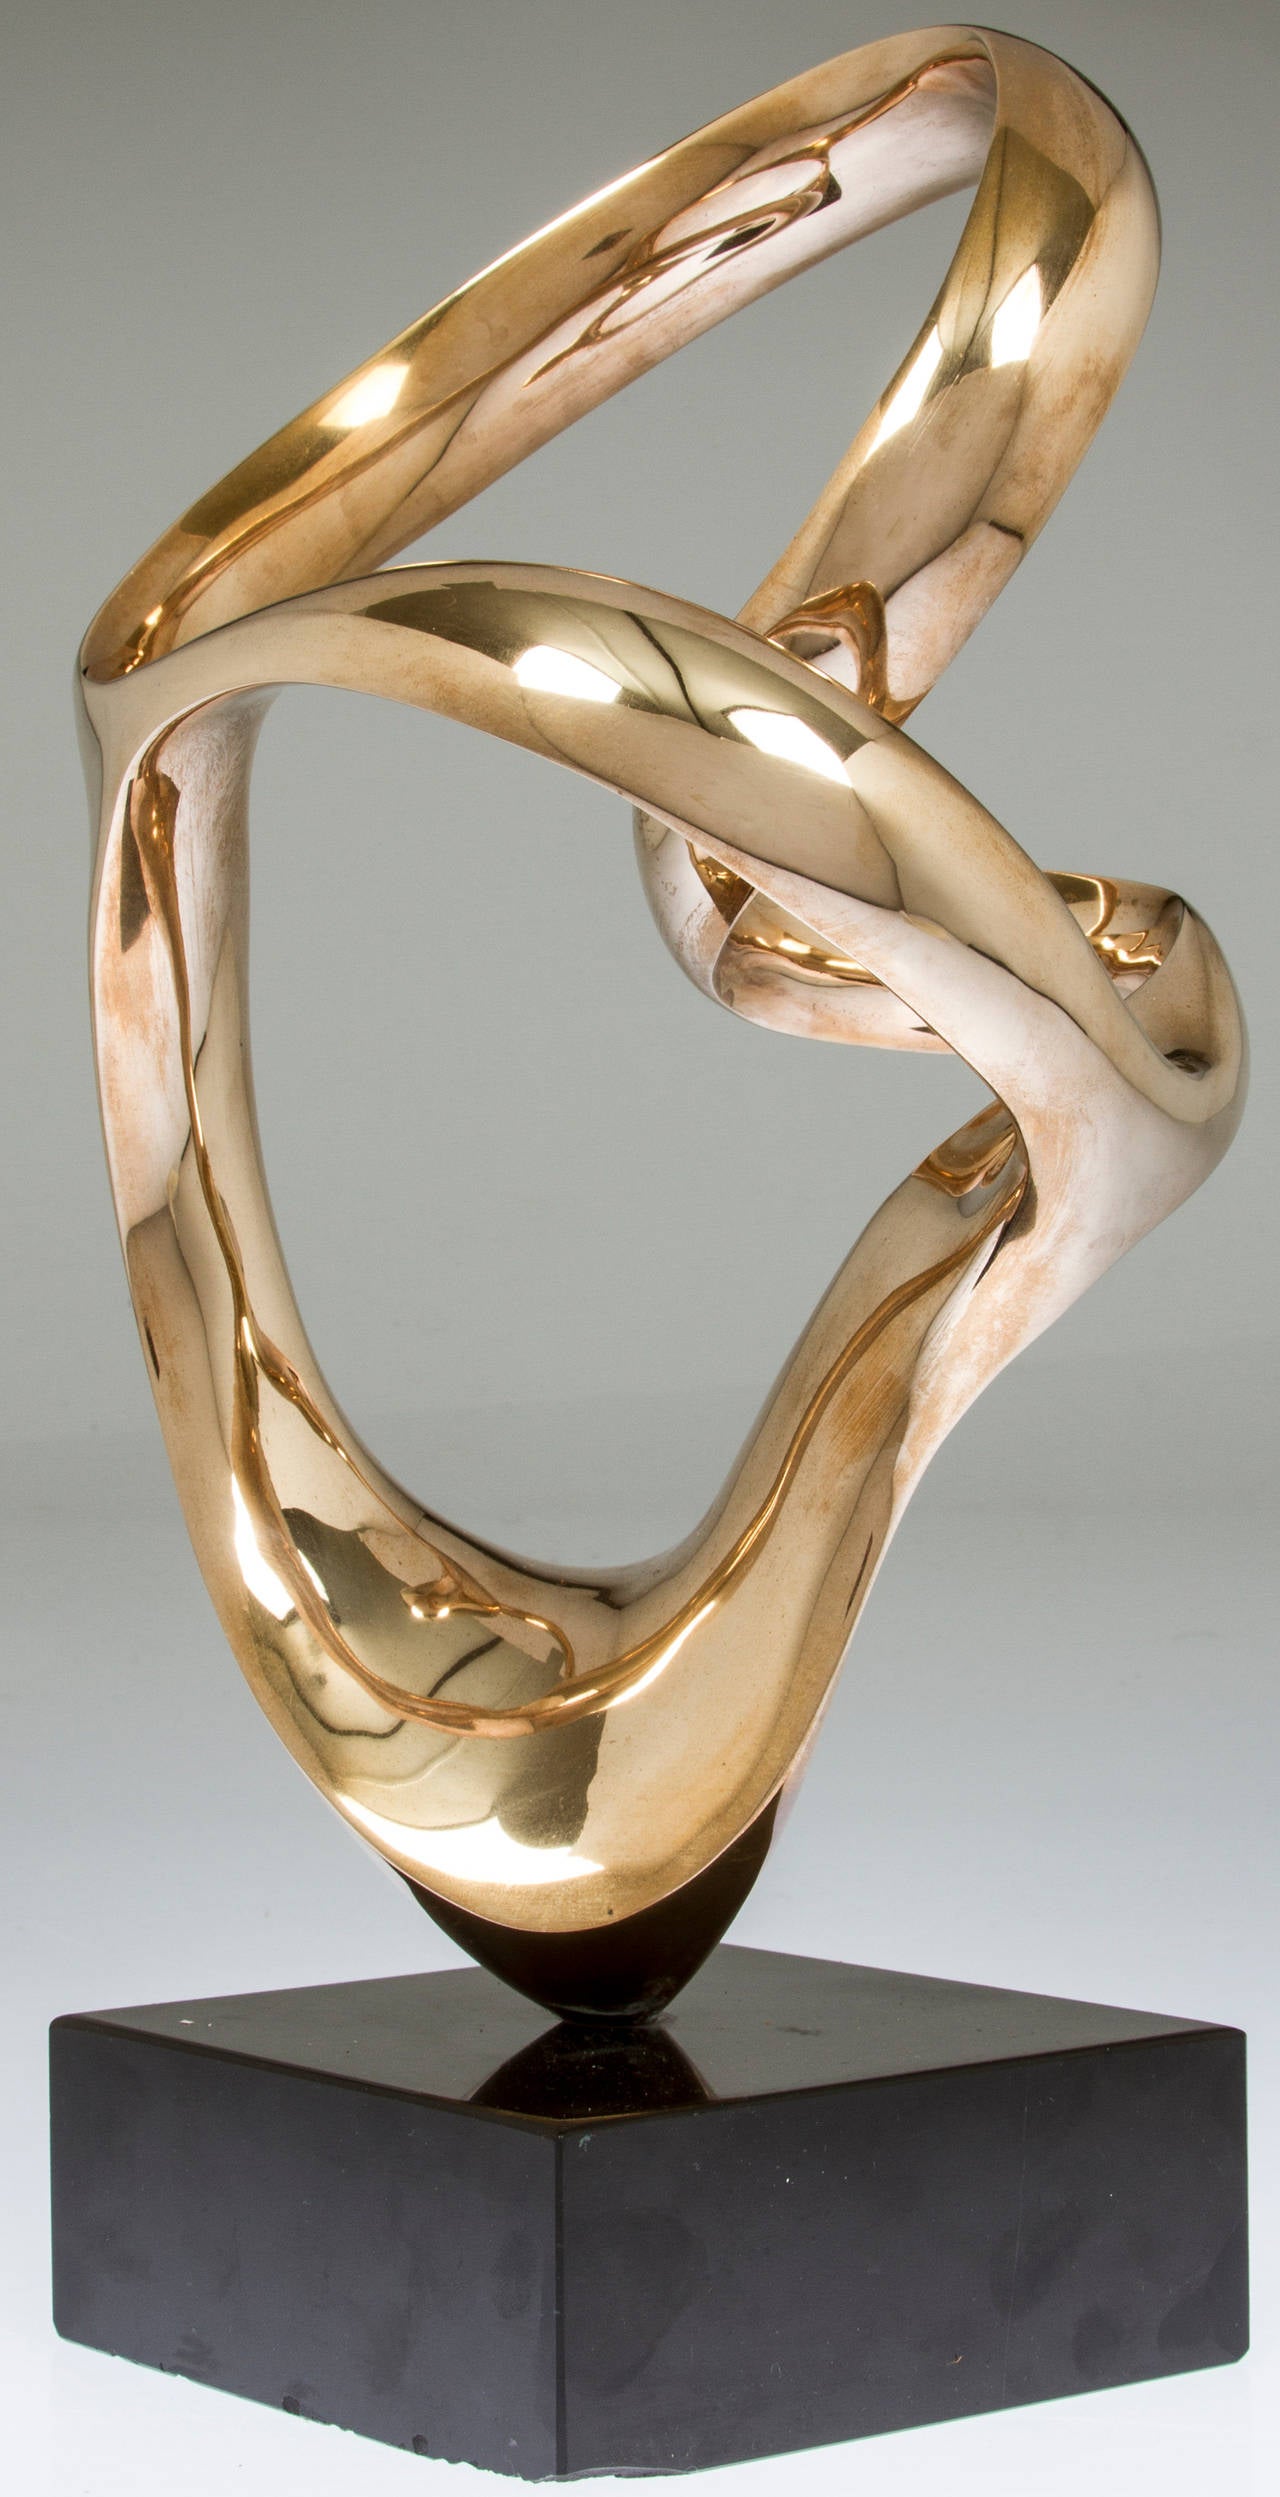 This is a wonderful polished bronze by Kieff. Nine out of an edition of nine, with a personal inscription by the artist.